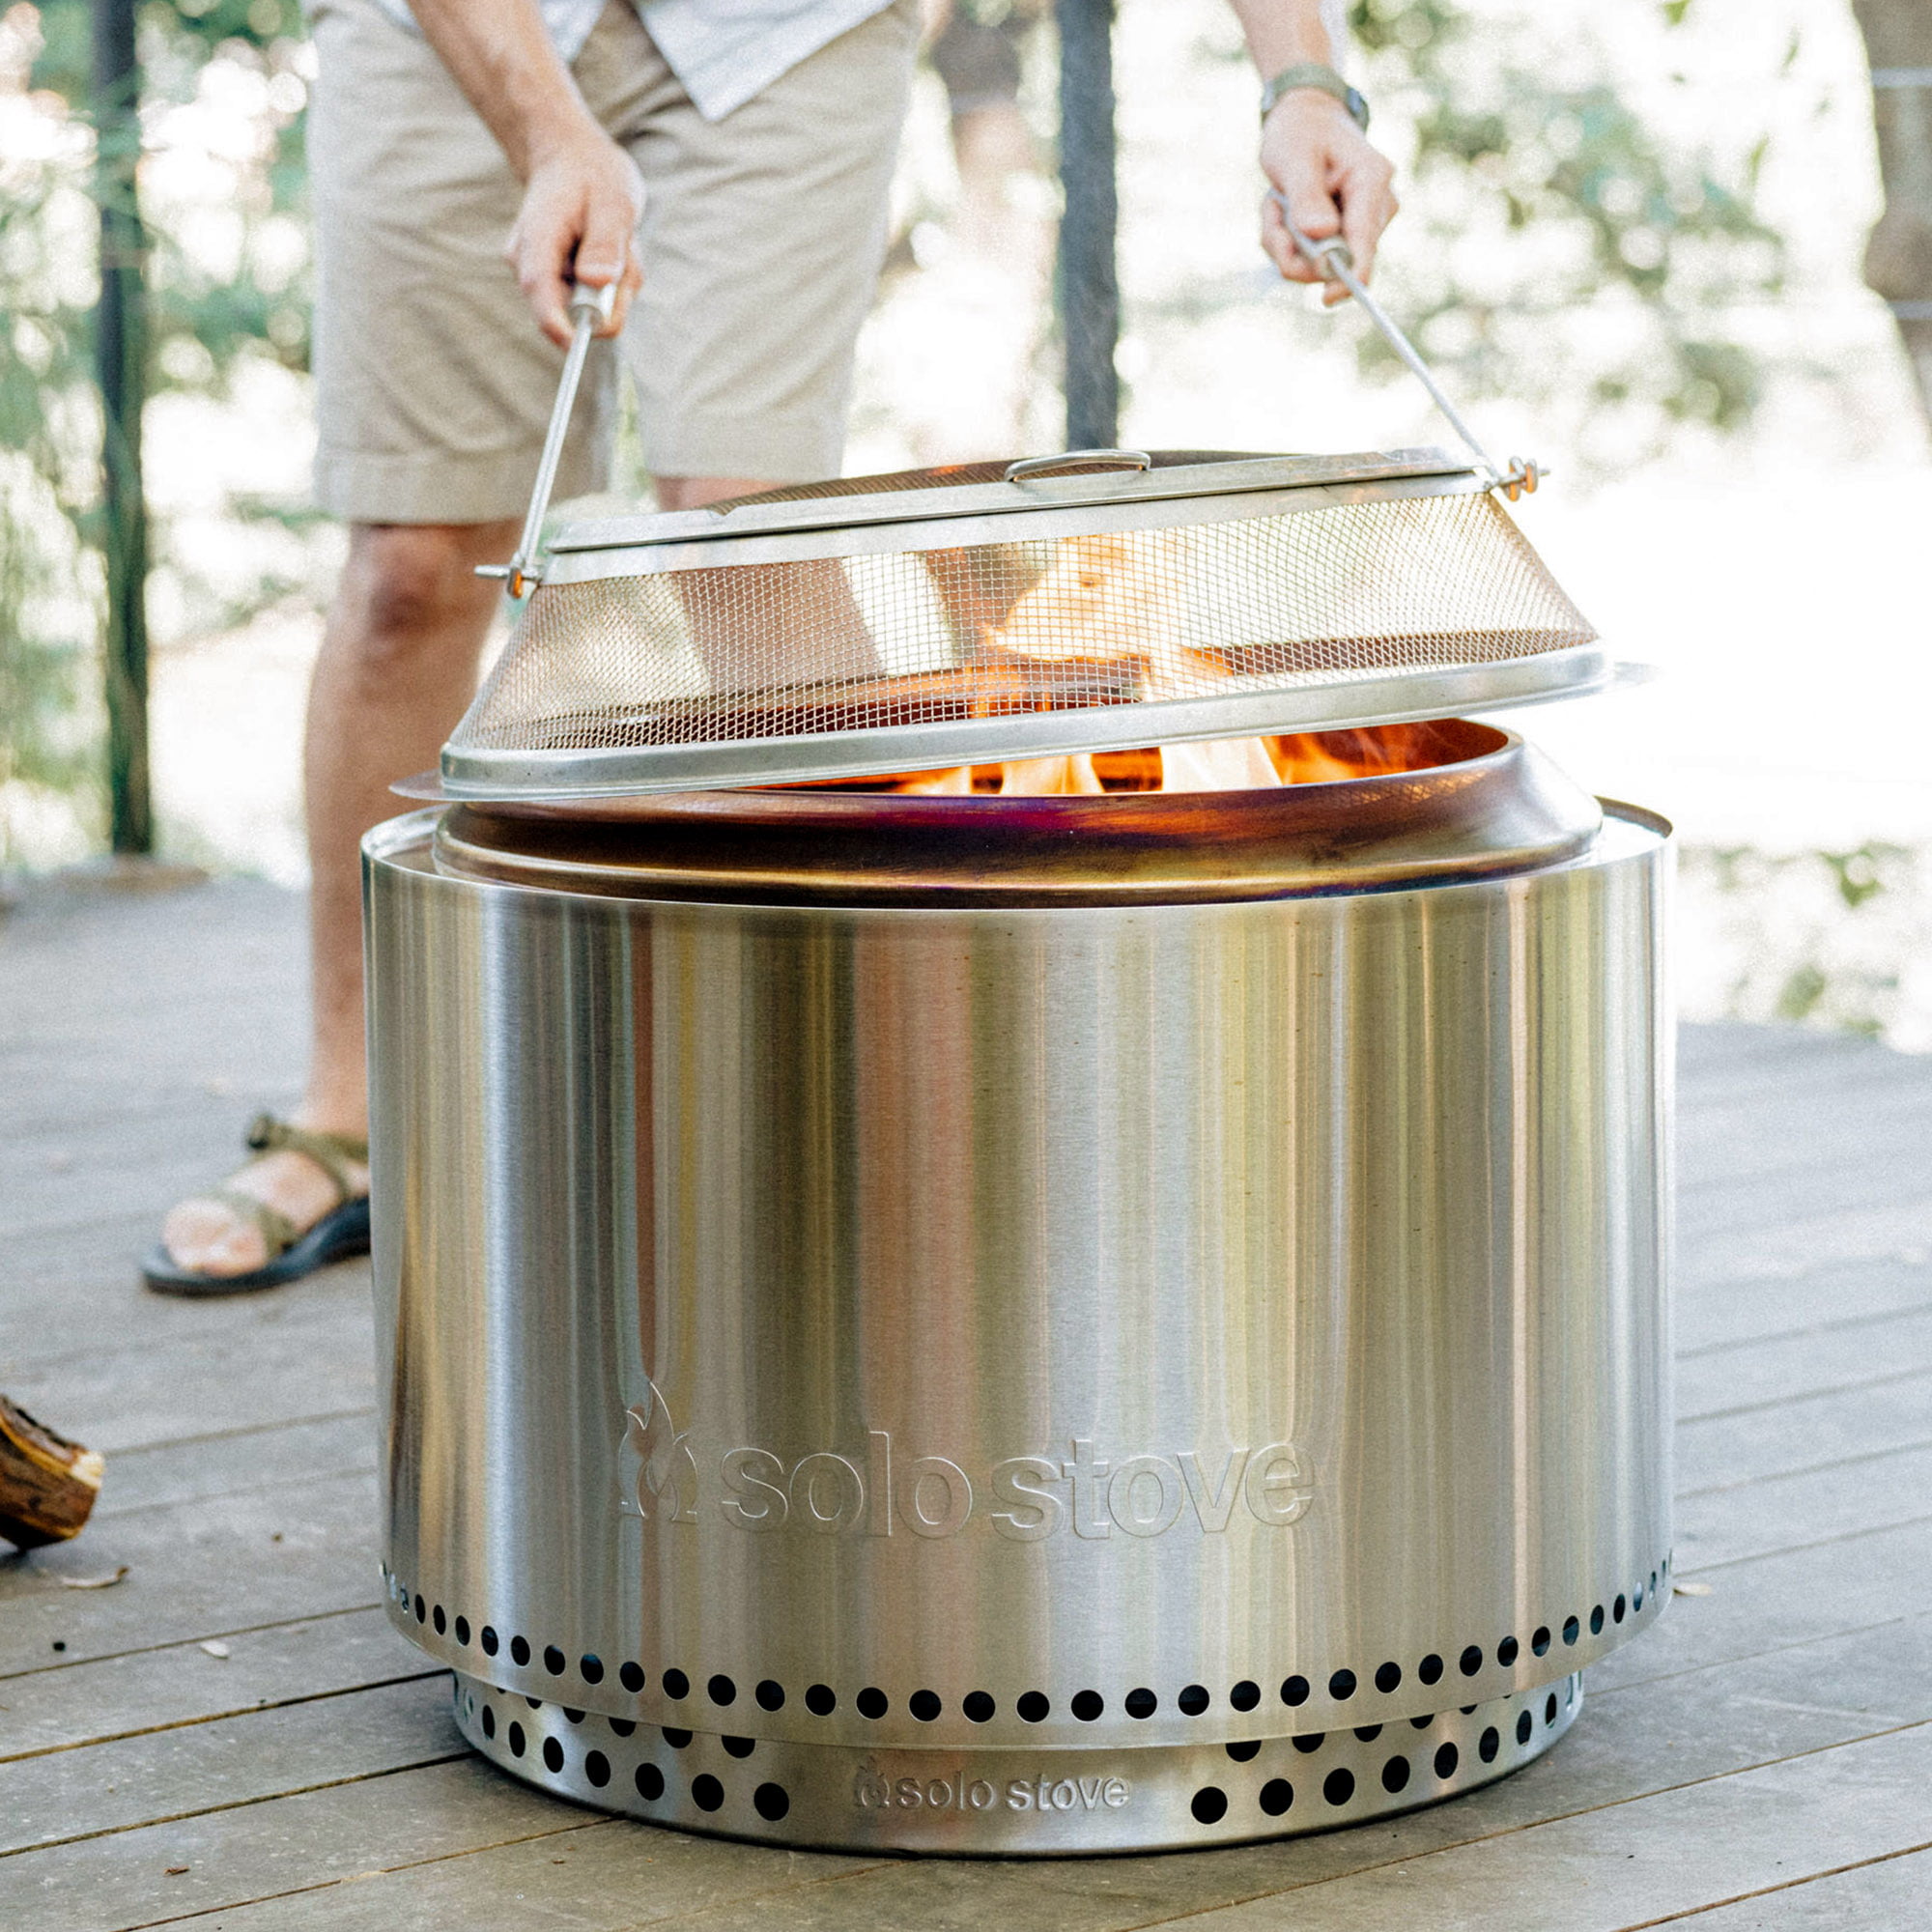  Yukon Outfitters Everyday Outdoor Stainless Steel